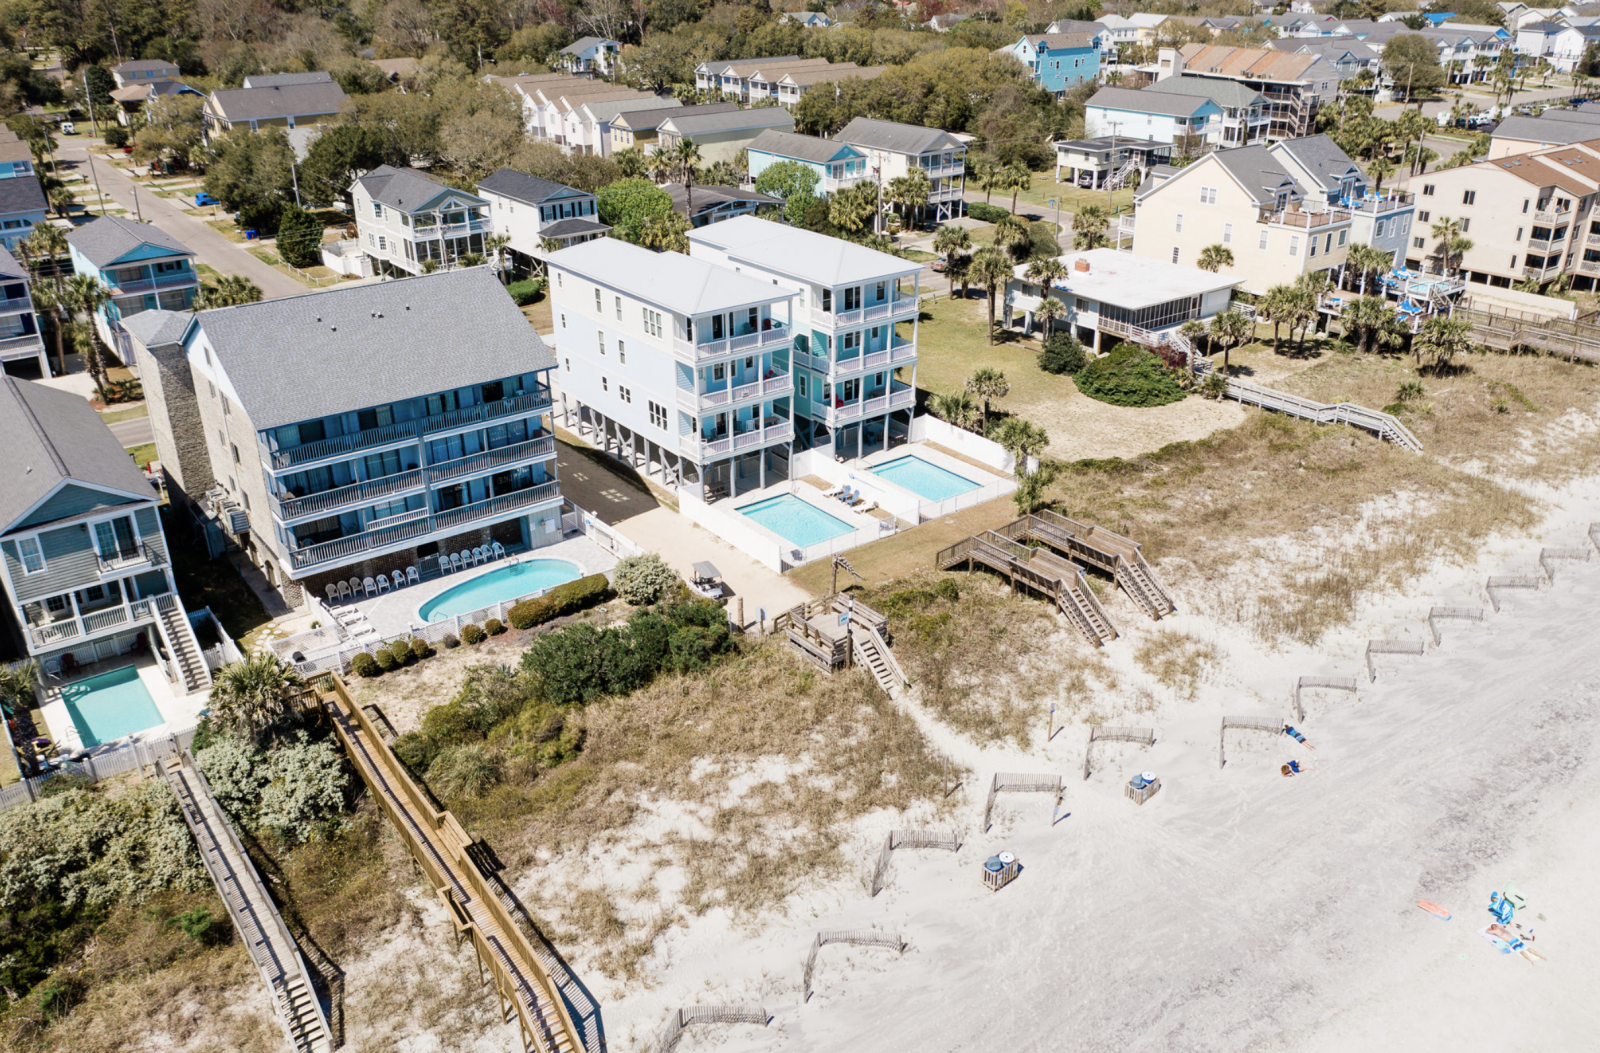 An oceanfront vacation rental with private pools